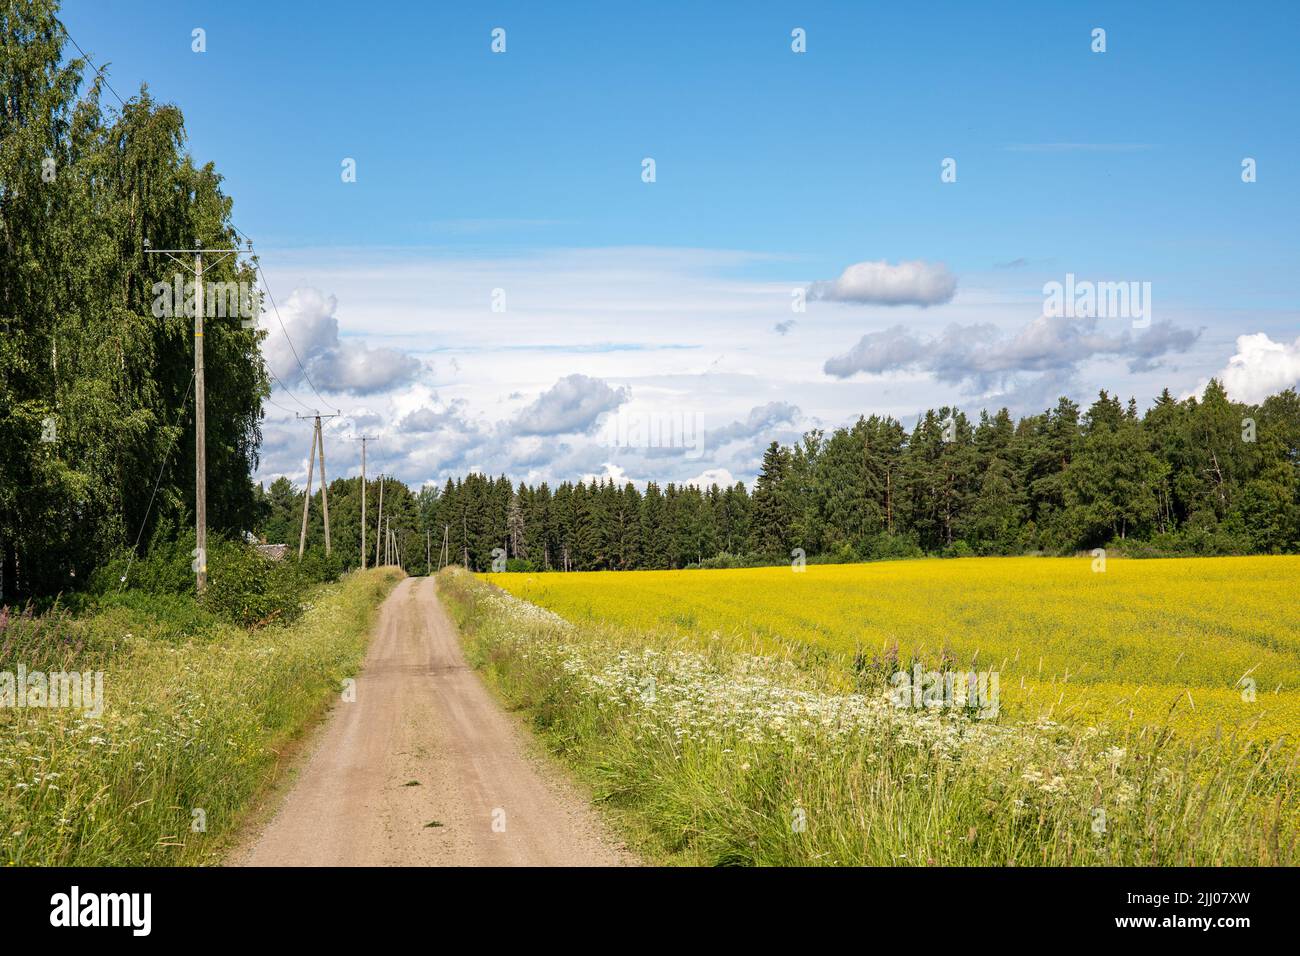 Rural dirt or gravel road by canola field in Orivesi, Finland Stock Photo